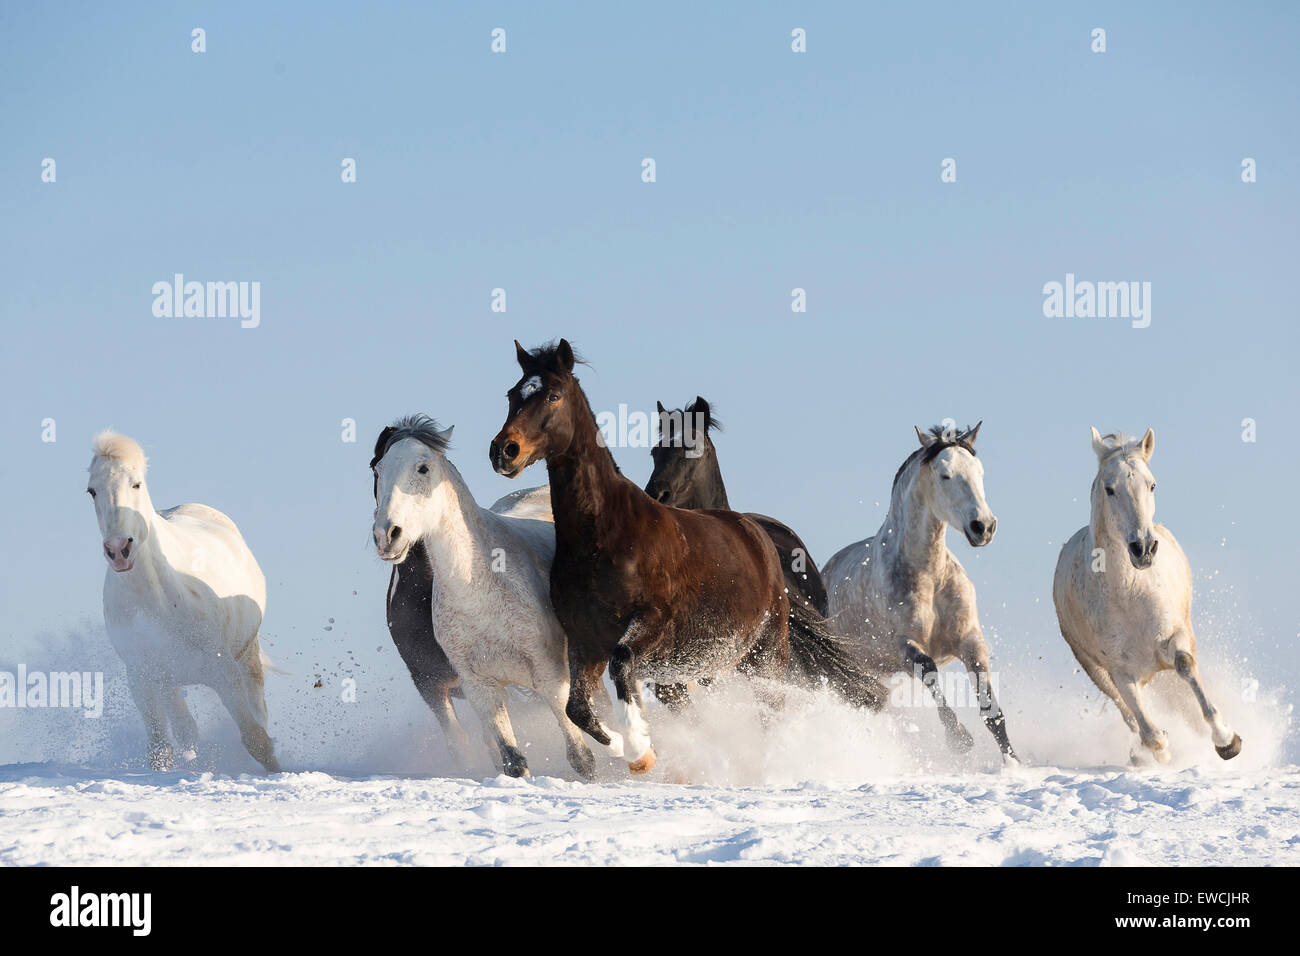 Pure Spanish Horse, Andalusian. Herd galloping on a snowy pasture. Germany Stock Photo